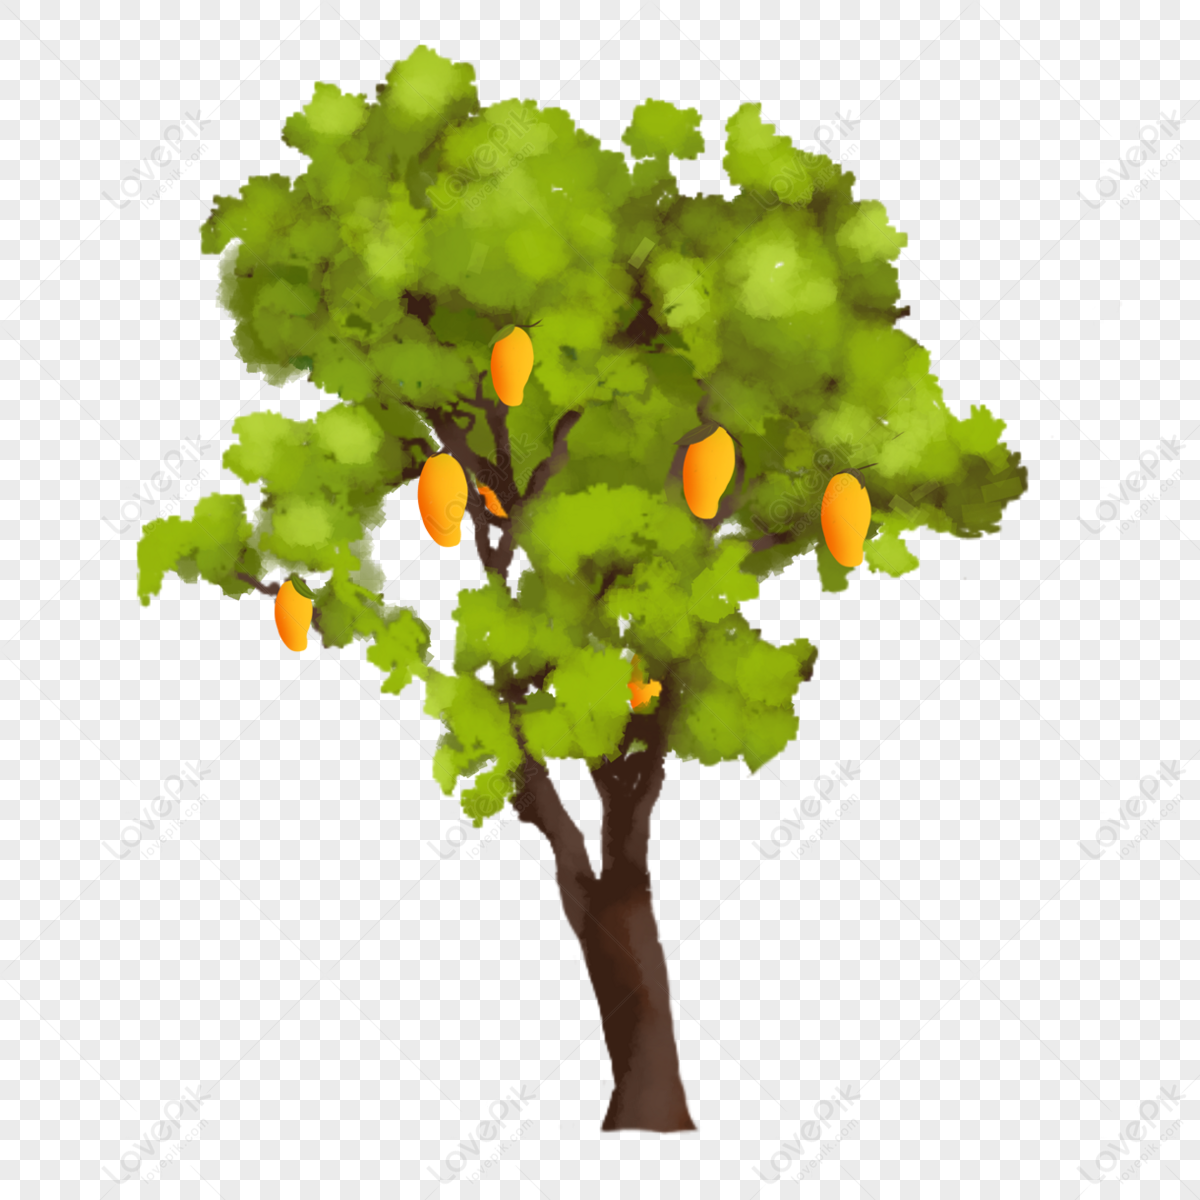 Yellow mango tree isolated on white background | Tree drawing, Fruits  drawing, Tree painting